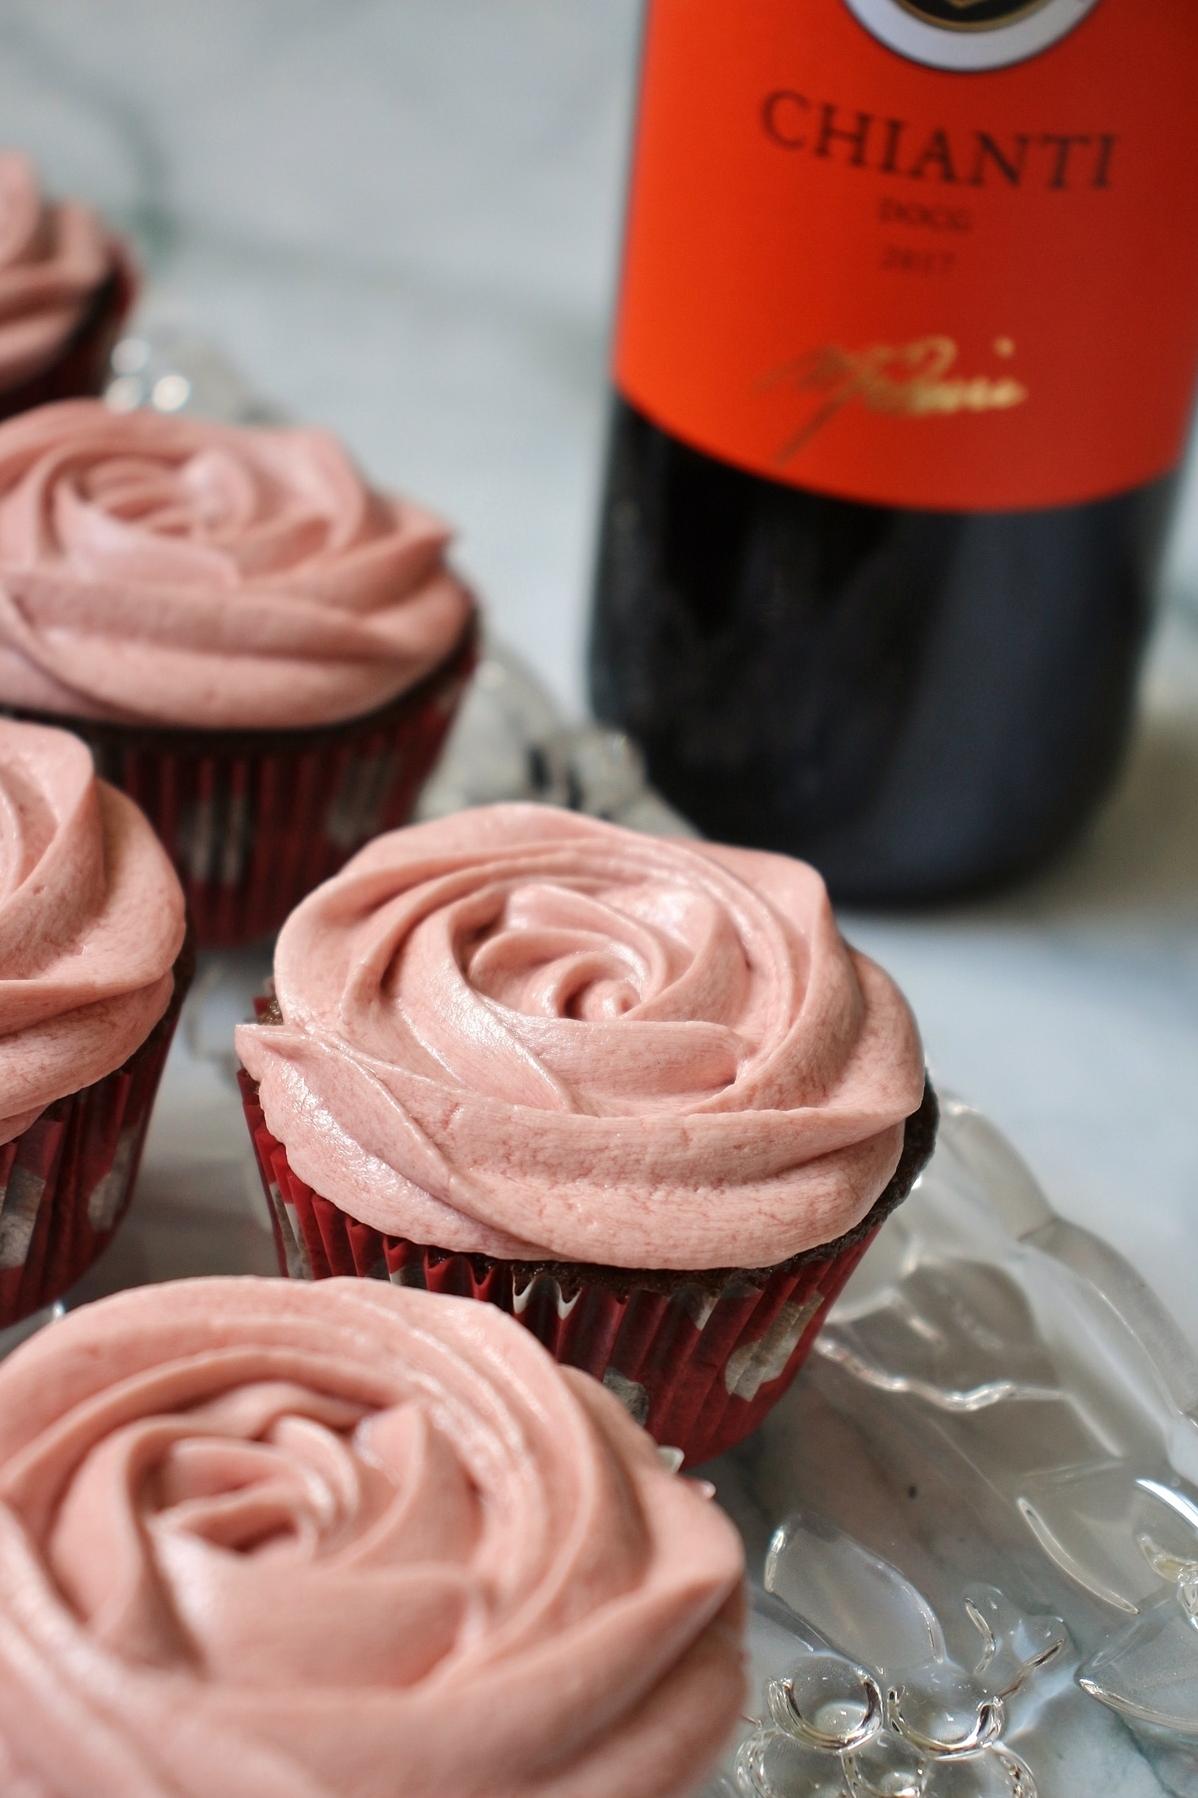  These cupcakes are infused with the bold flavors of red wine, which makes them absolutely irresistible!